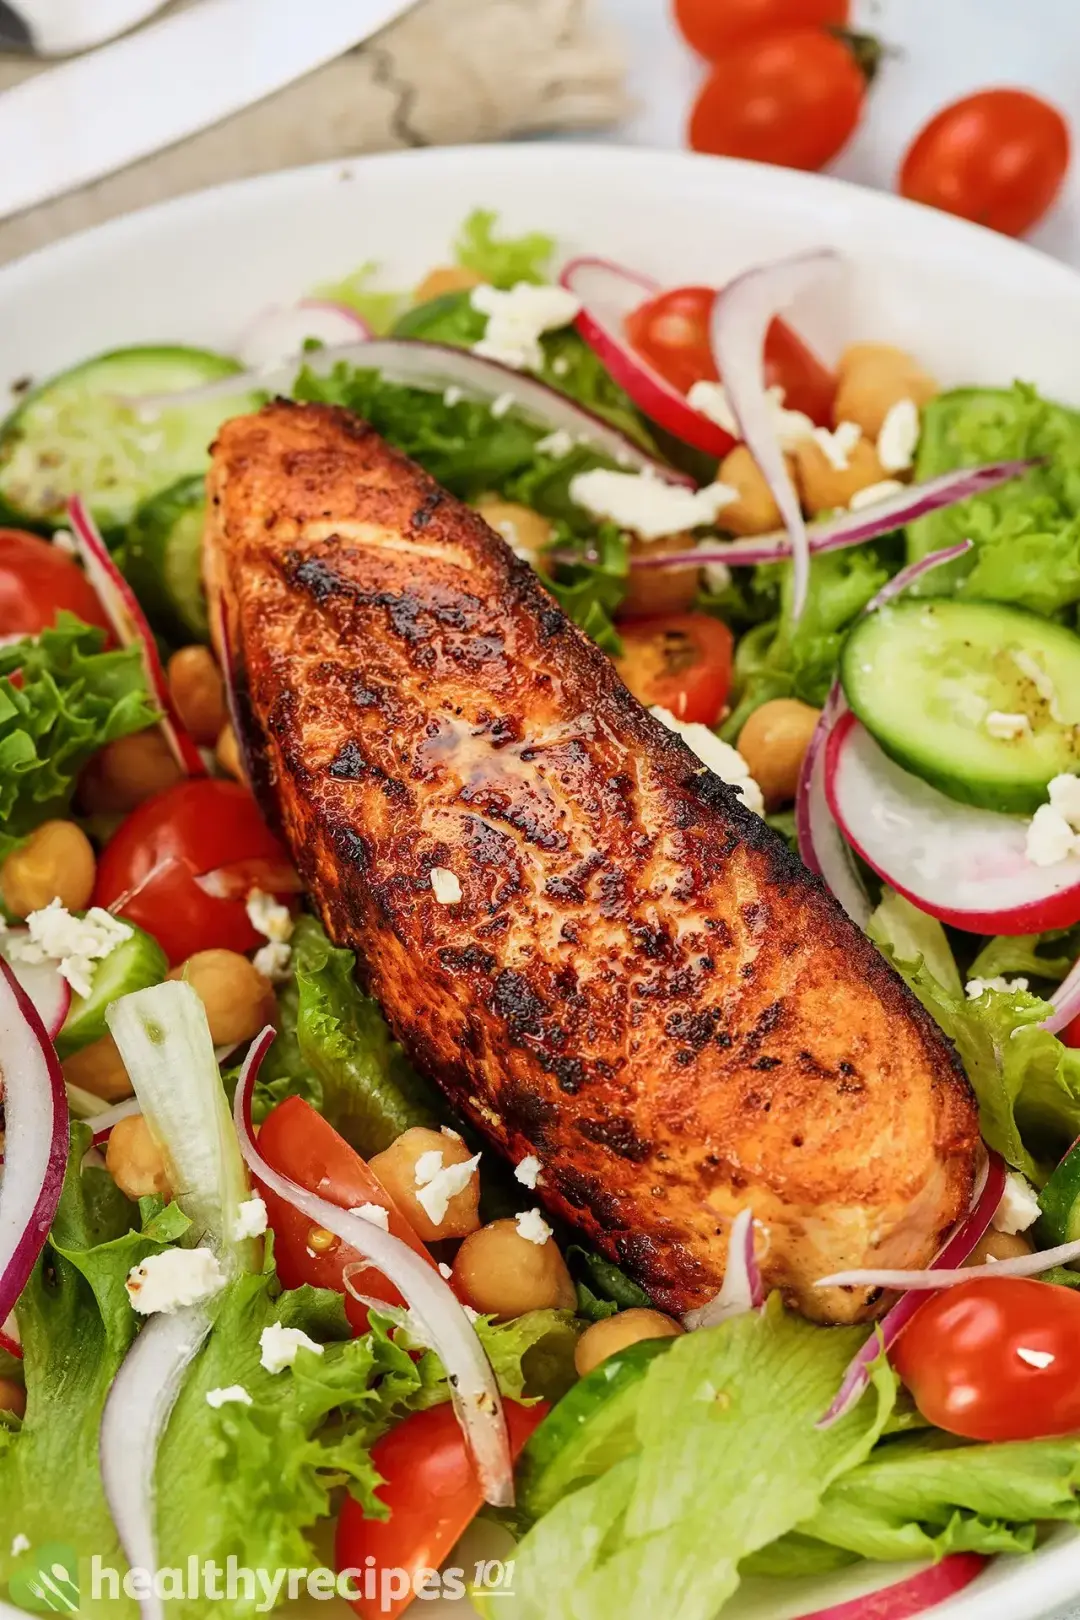 A pan-seared salmon fillet with charred marks laid over a bed of lettuce, chickpeas, halved cherry tomatoes, sliced radish and sliced cucumbers